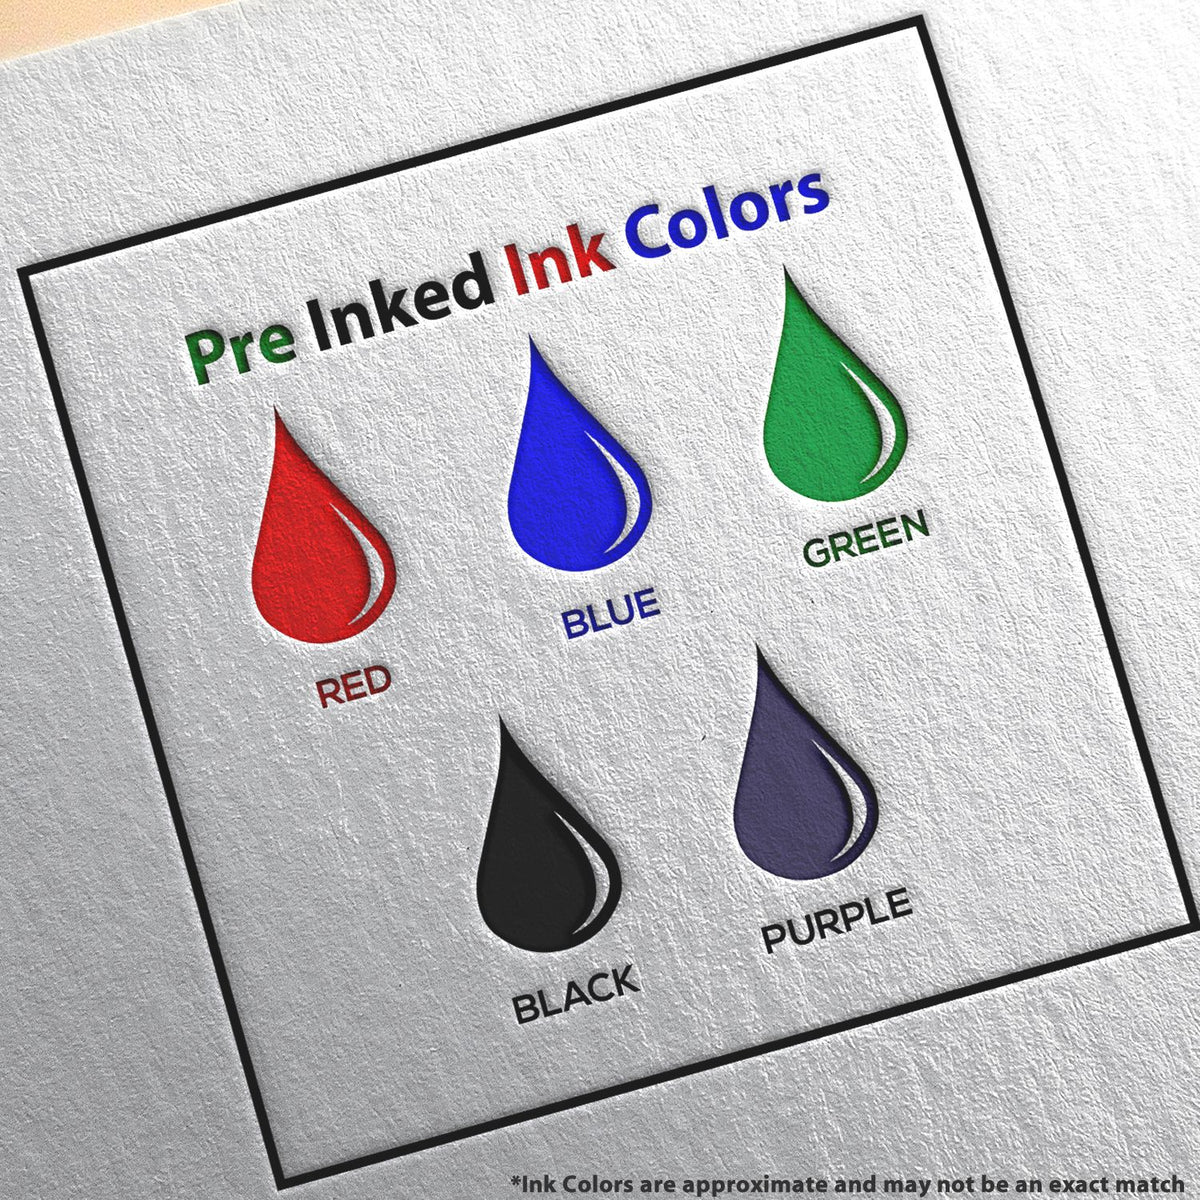 A picture showing the different ink colors or hues available for the MaxLight Premium Pre-Inked Wyoming Rectangular Notarial Stamp product.